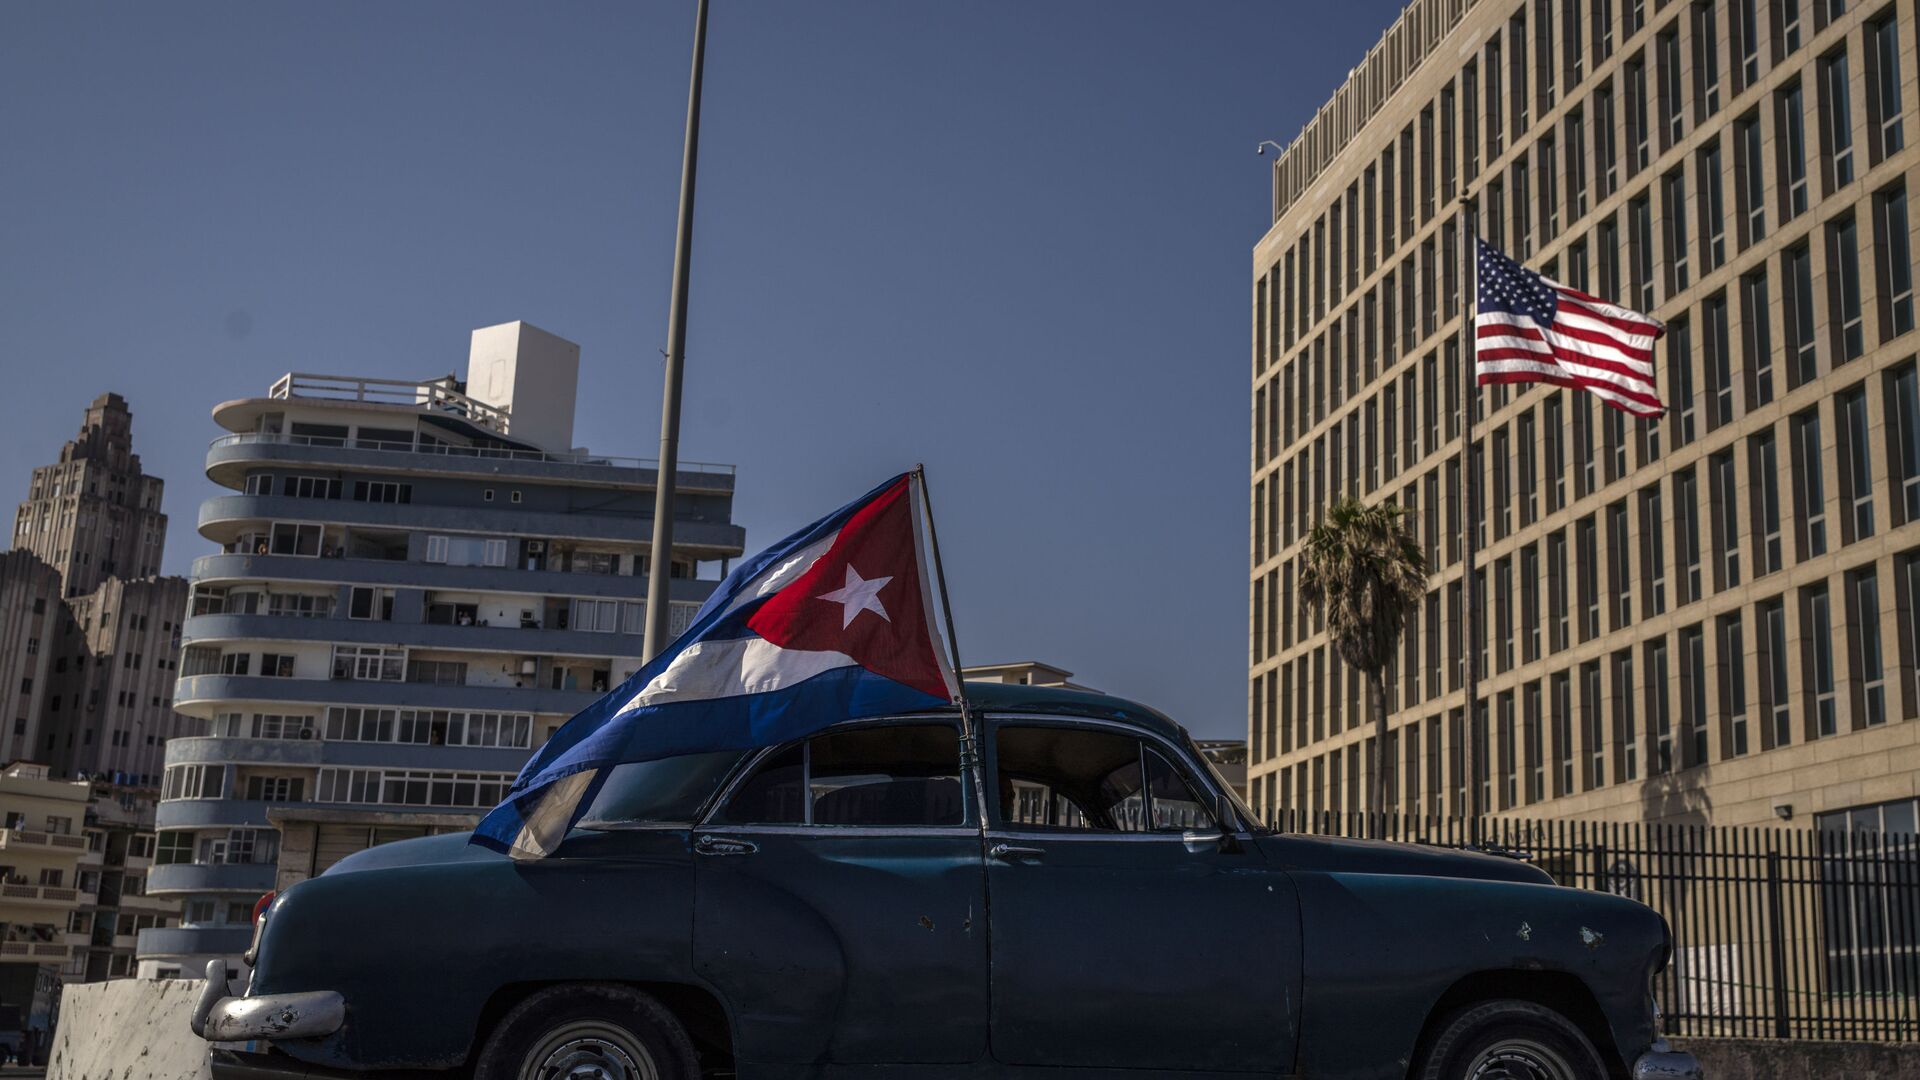 A classic American car flying a Cuban flag drives past the American embassy during a rally calling for the end of the US blockade against the island nation, in Havana, Cuba, Sunday, March 28, 2021. - Sputnik International, 1920, 14.11.2021